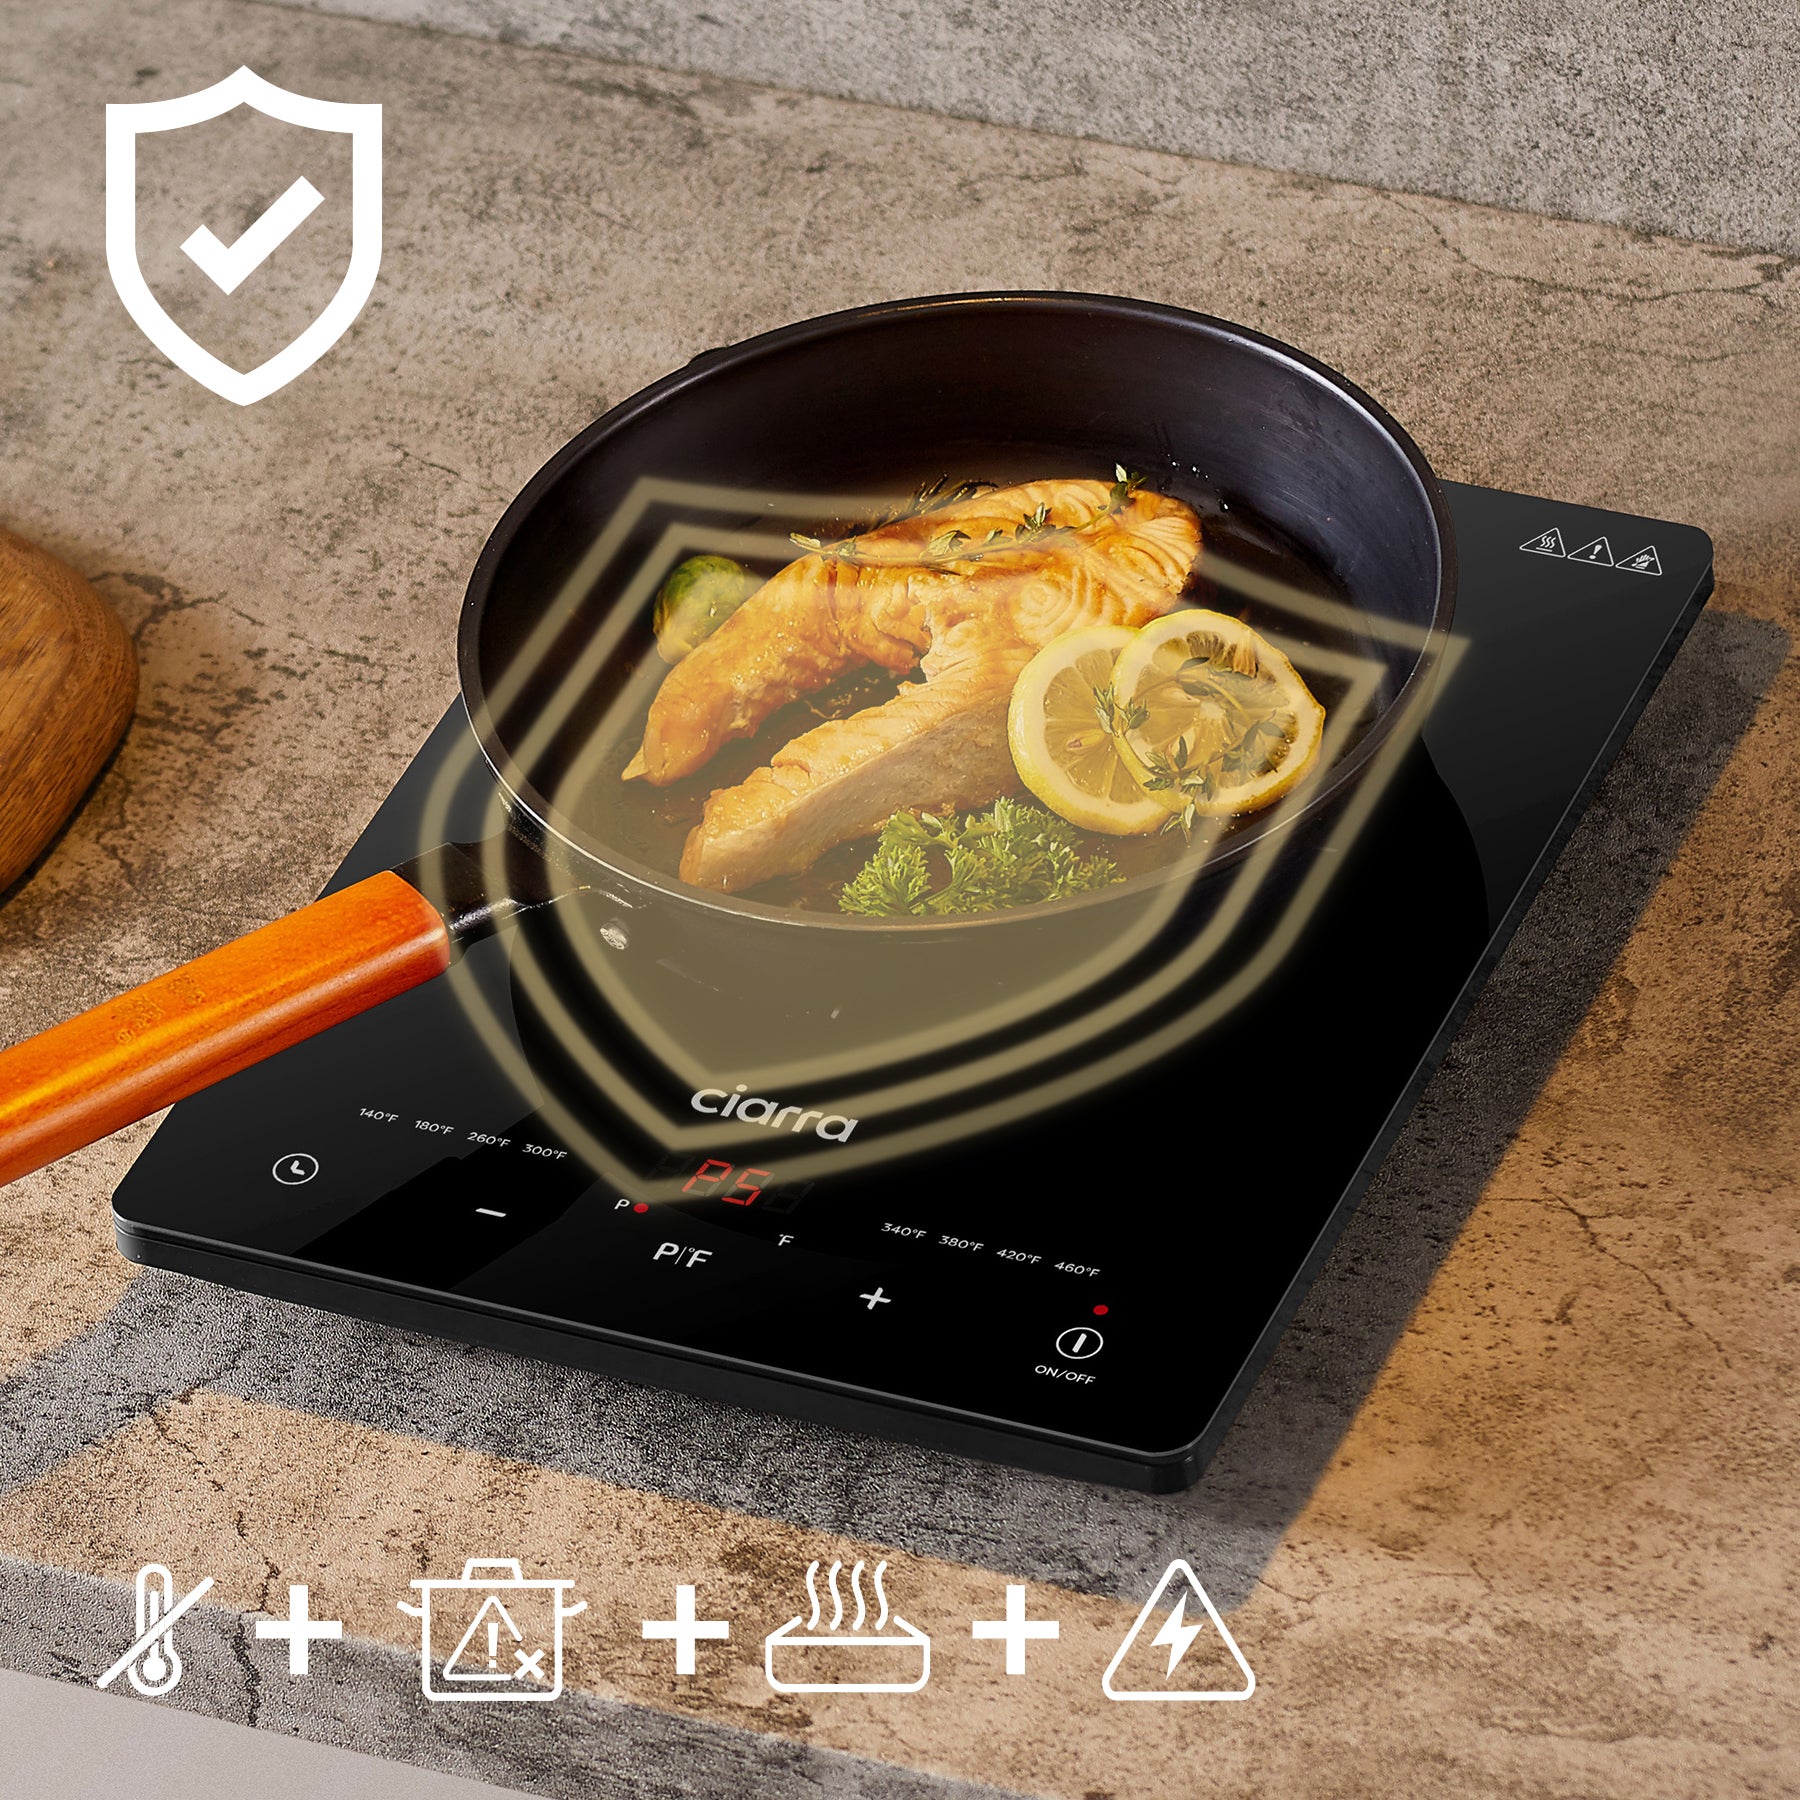 This portable induction cooktop is on sale at